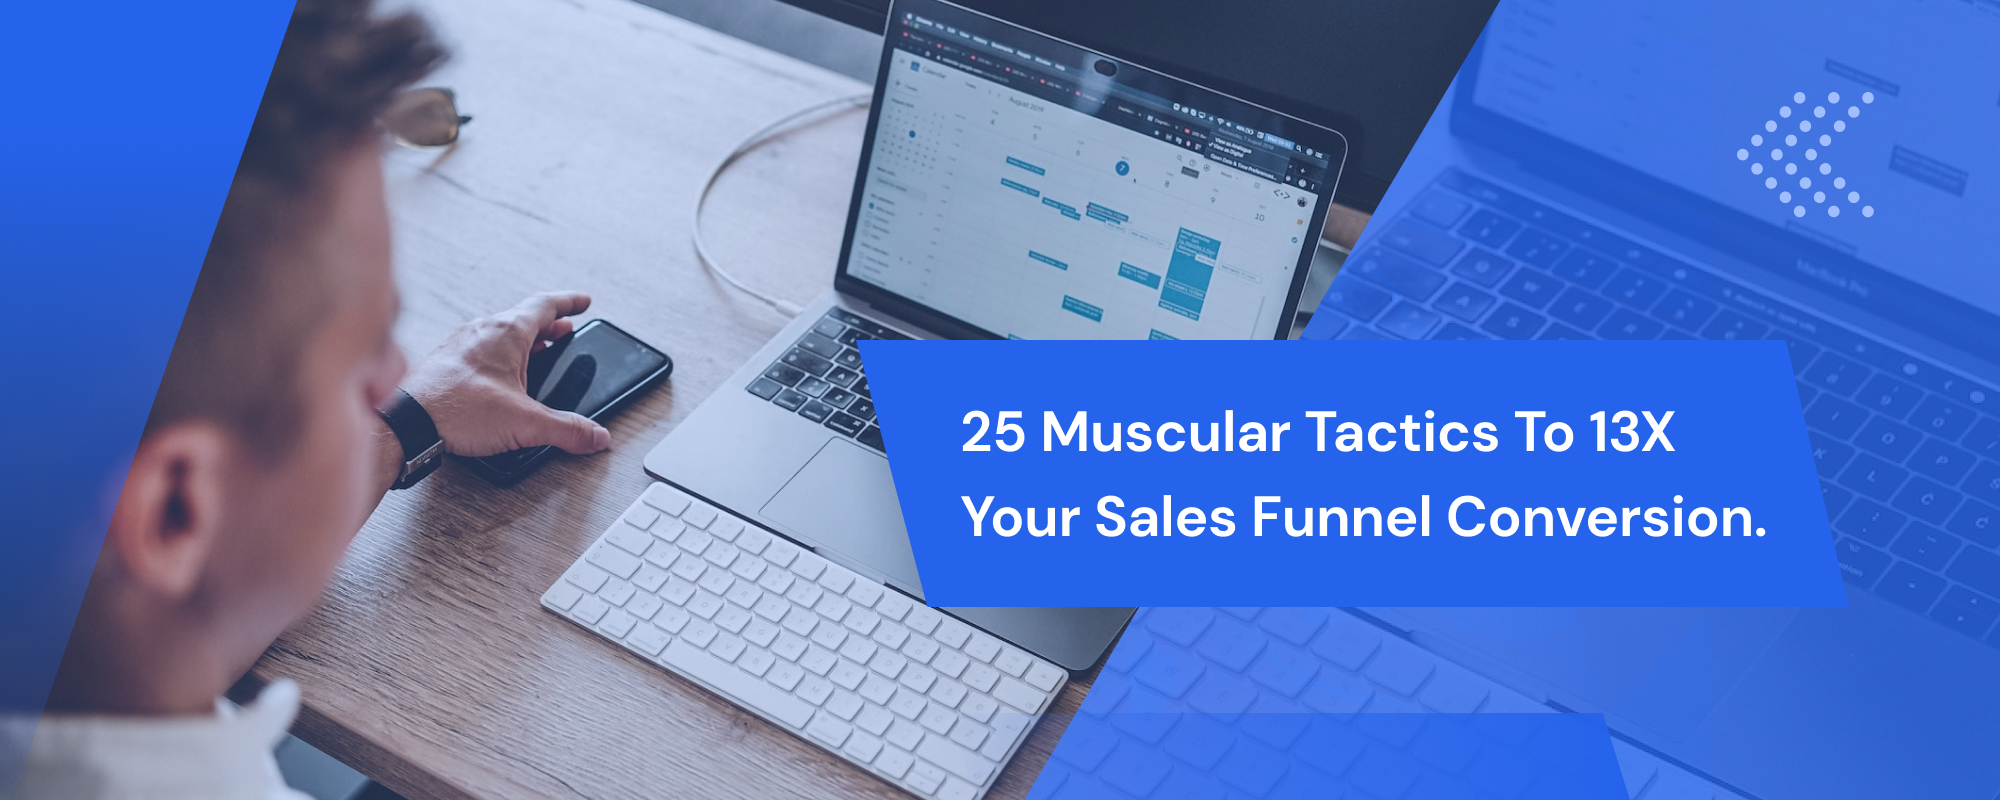 25 muscular tactics to 13X your sales funnel conversion.